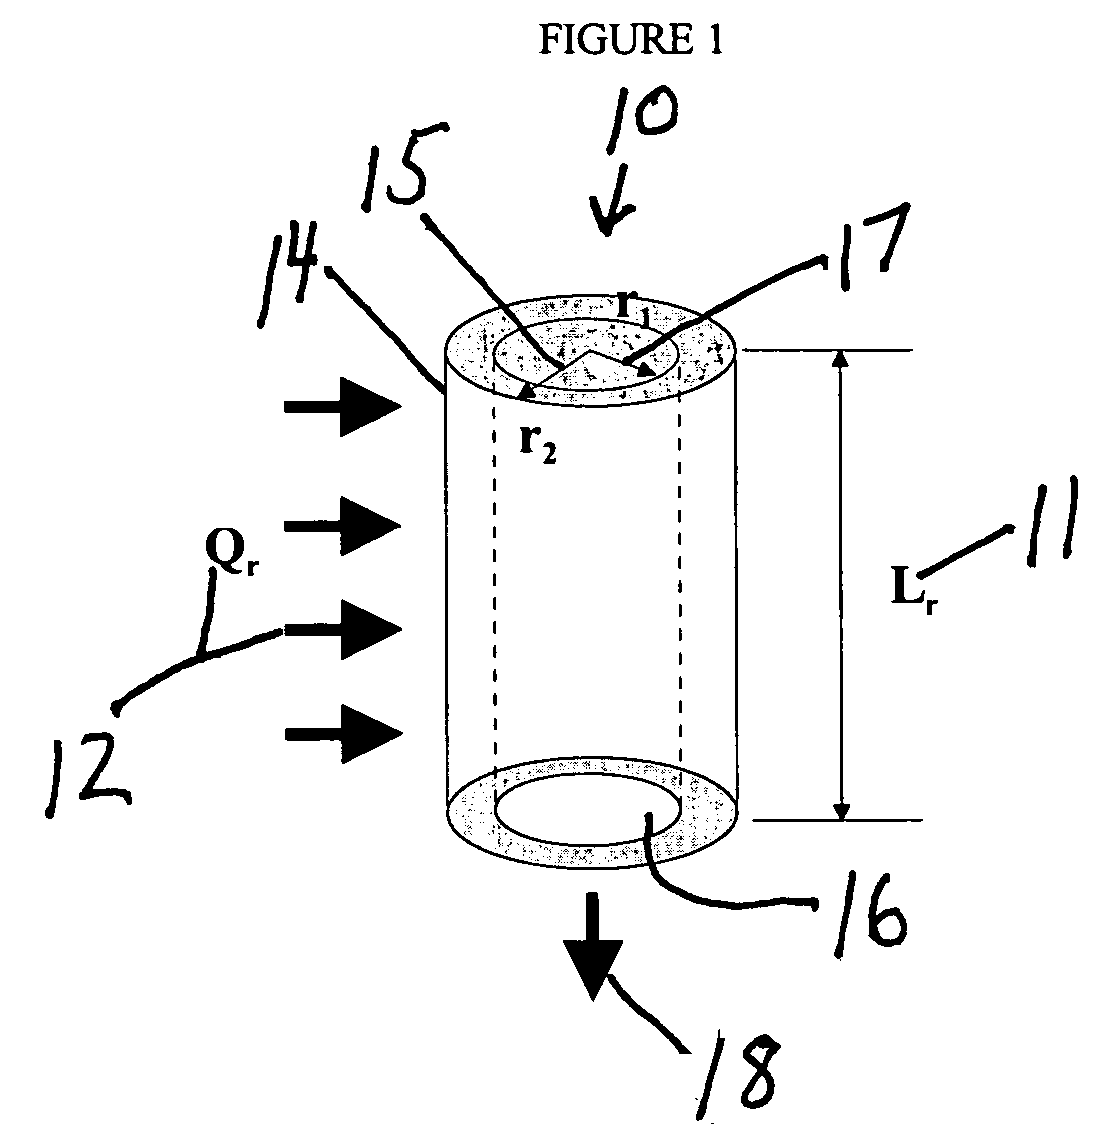 Filters having improved permeability and virus removal capabilities